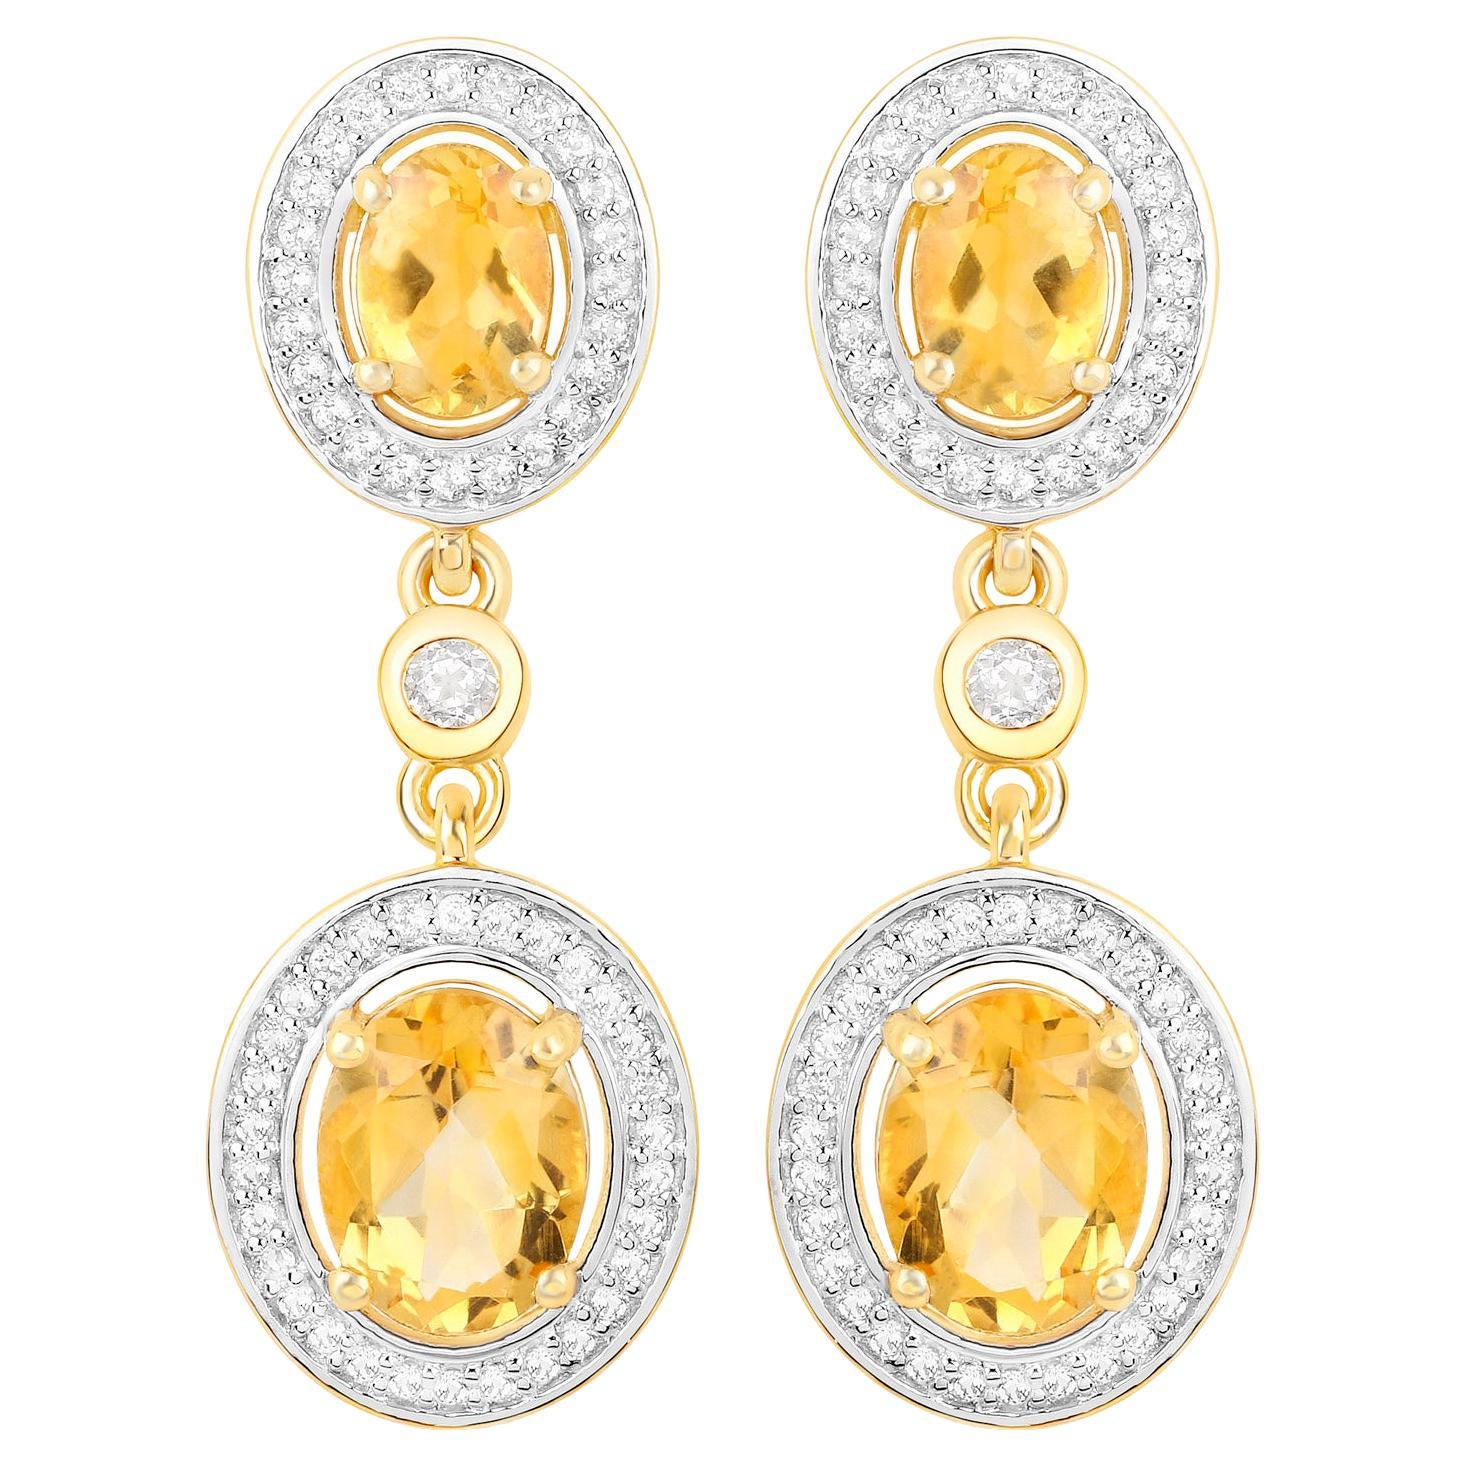 Citrine Earrings With Topazes 5.70 Carats 18K Yellow Gold Plated Sterling Silver